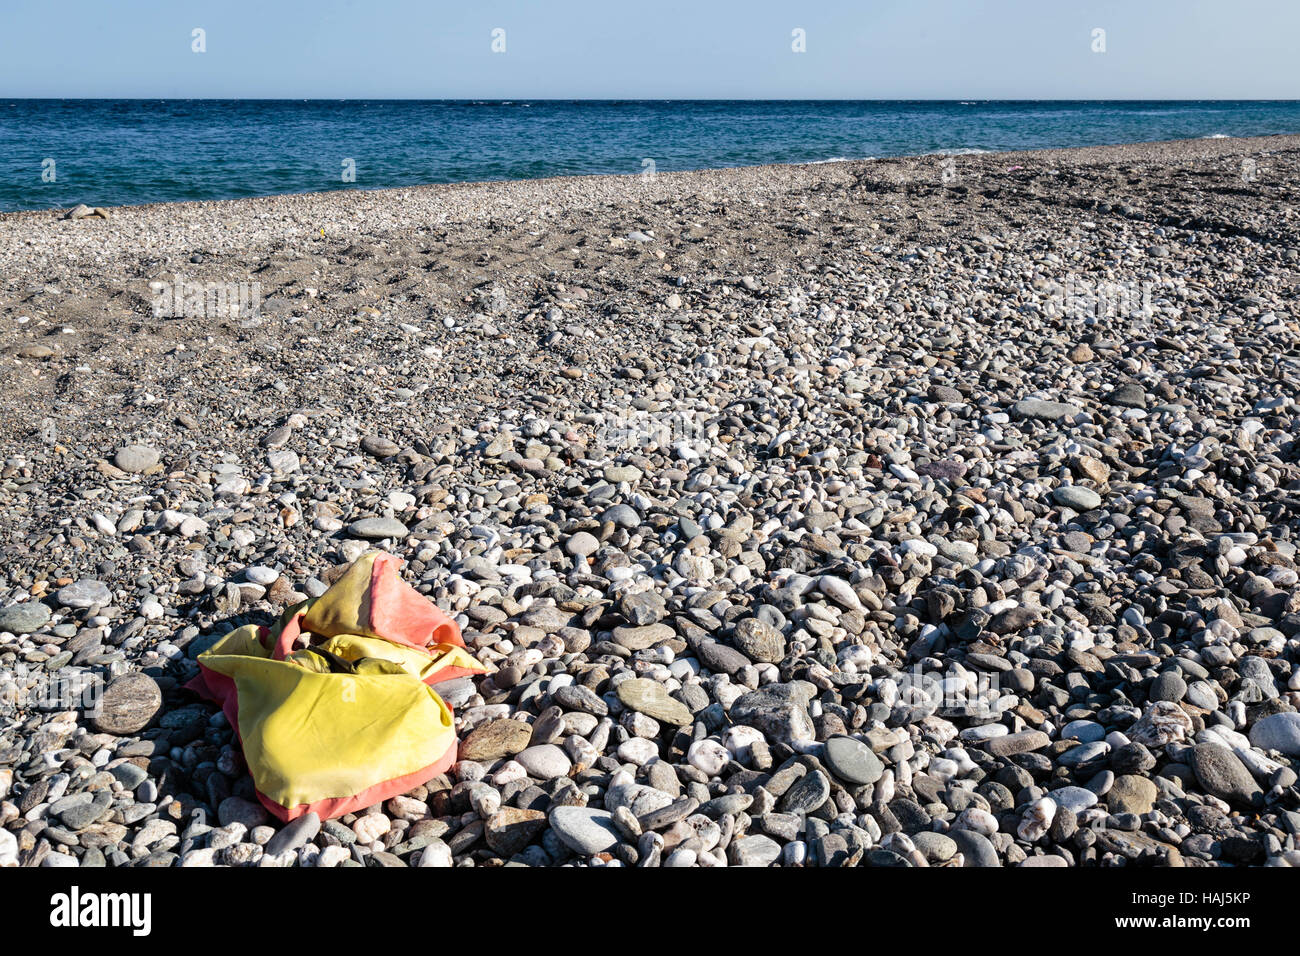 Abandoned life-vest on a beach in Sicily. Stock Photo